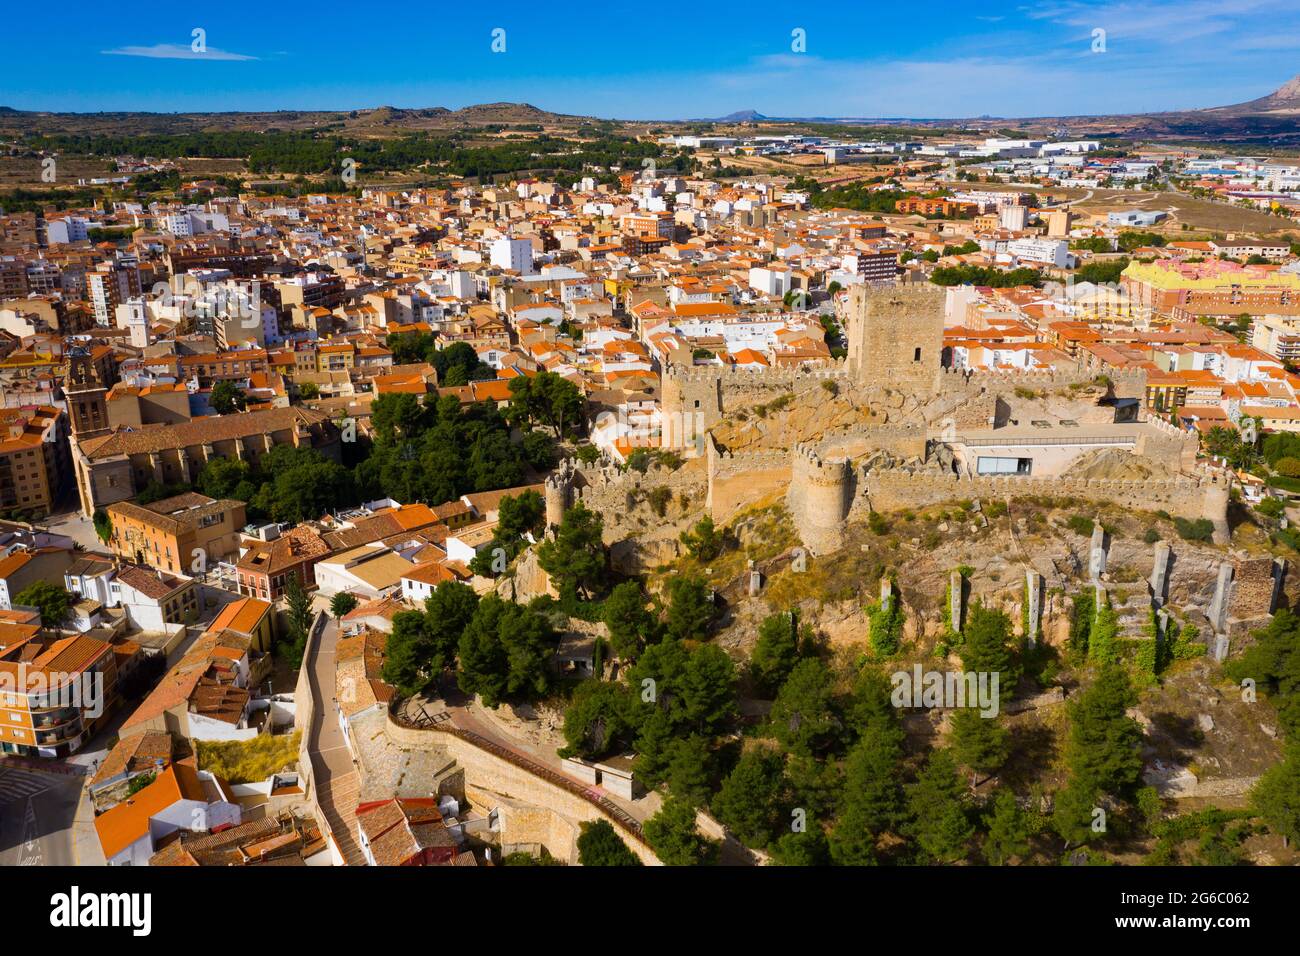 Aerial view of Almansa overlooking Church of la Asuncion and fortress, Spain Stock Photo